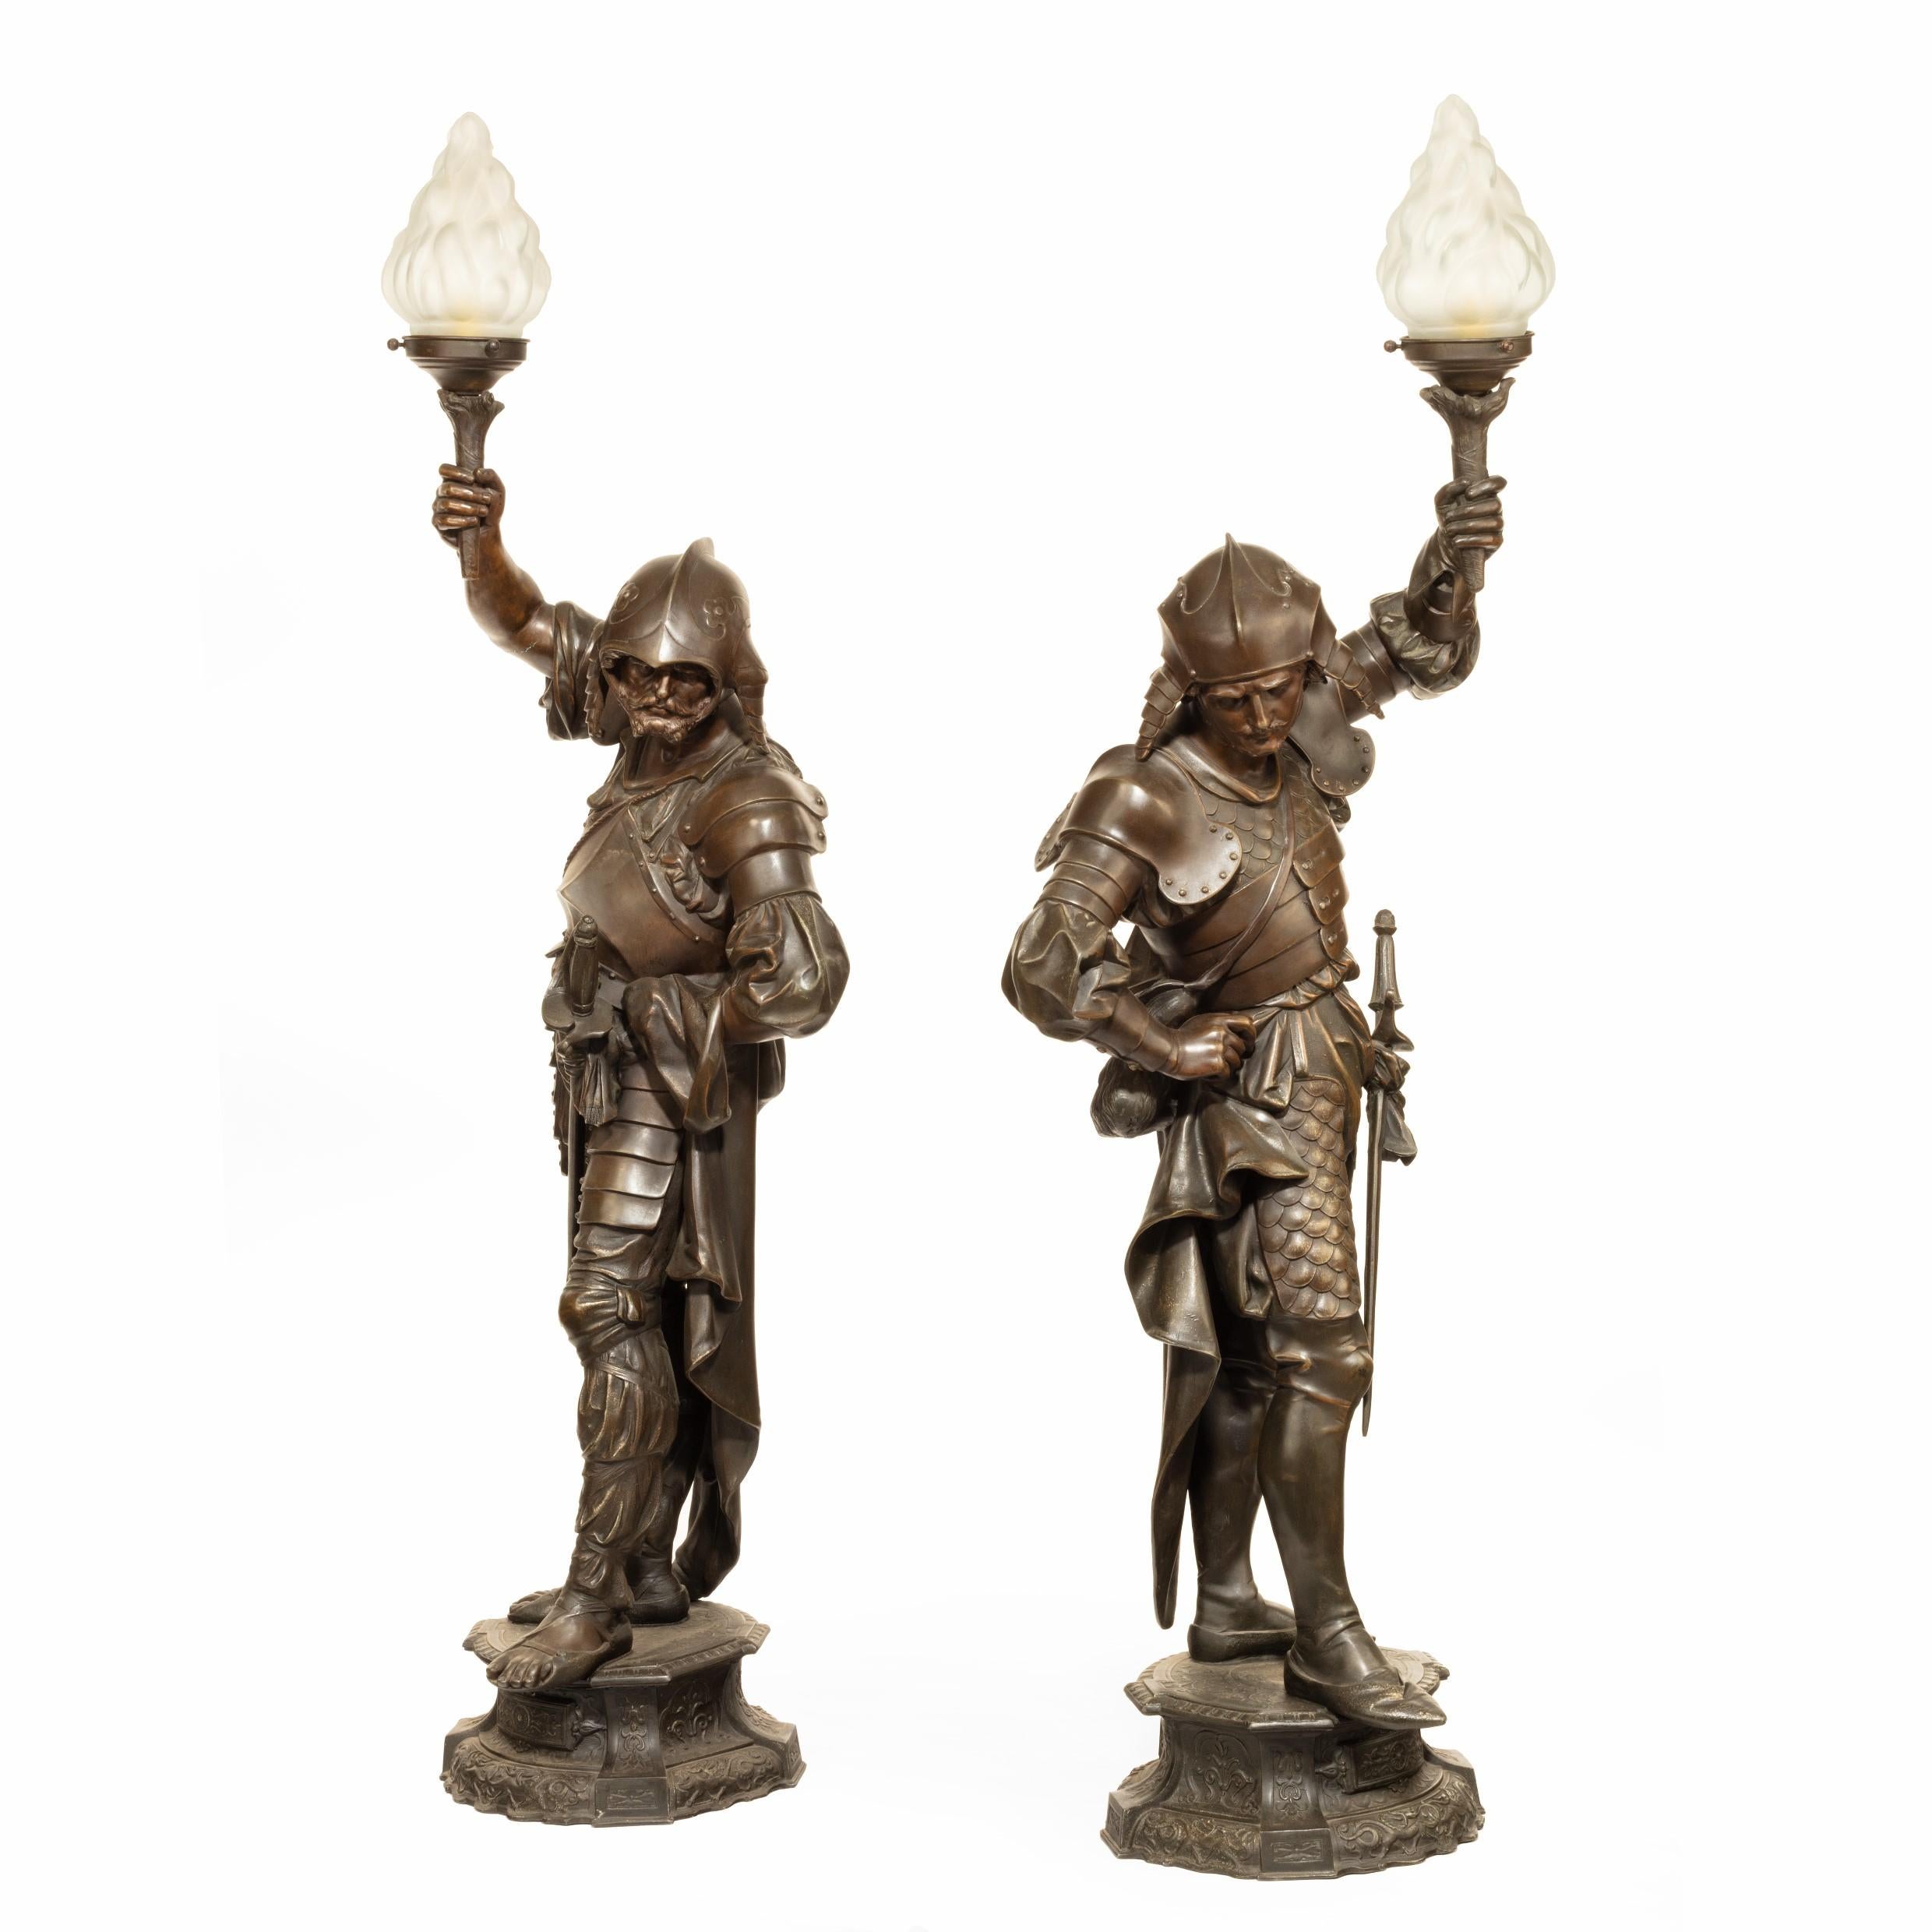 A pair of Continental bronzed-spelter gasoliers, each in the form of a soldier wearing heavy plate armor and ridged helmet with ear flaps, holding aloft a torch with a frosted glass flambé shade, on a flanged base, fitted for electricity, circa 1900.